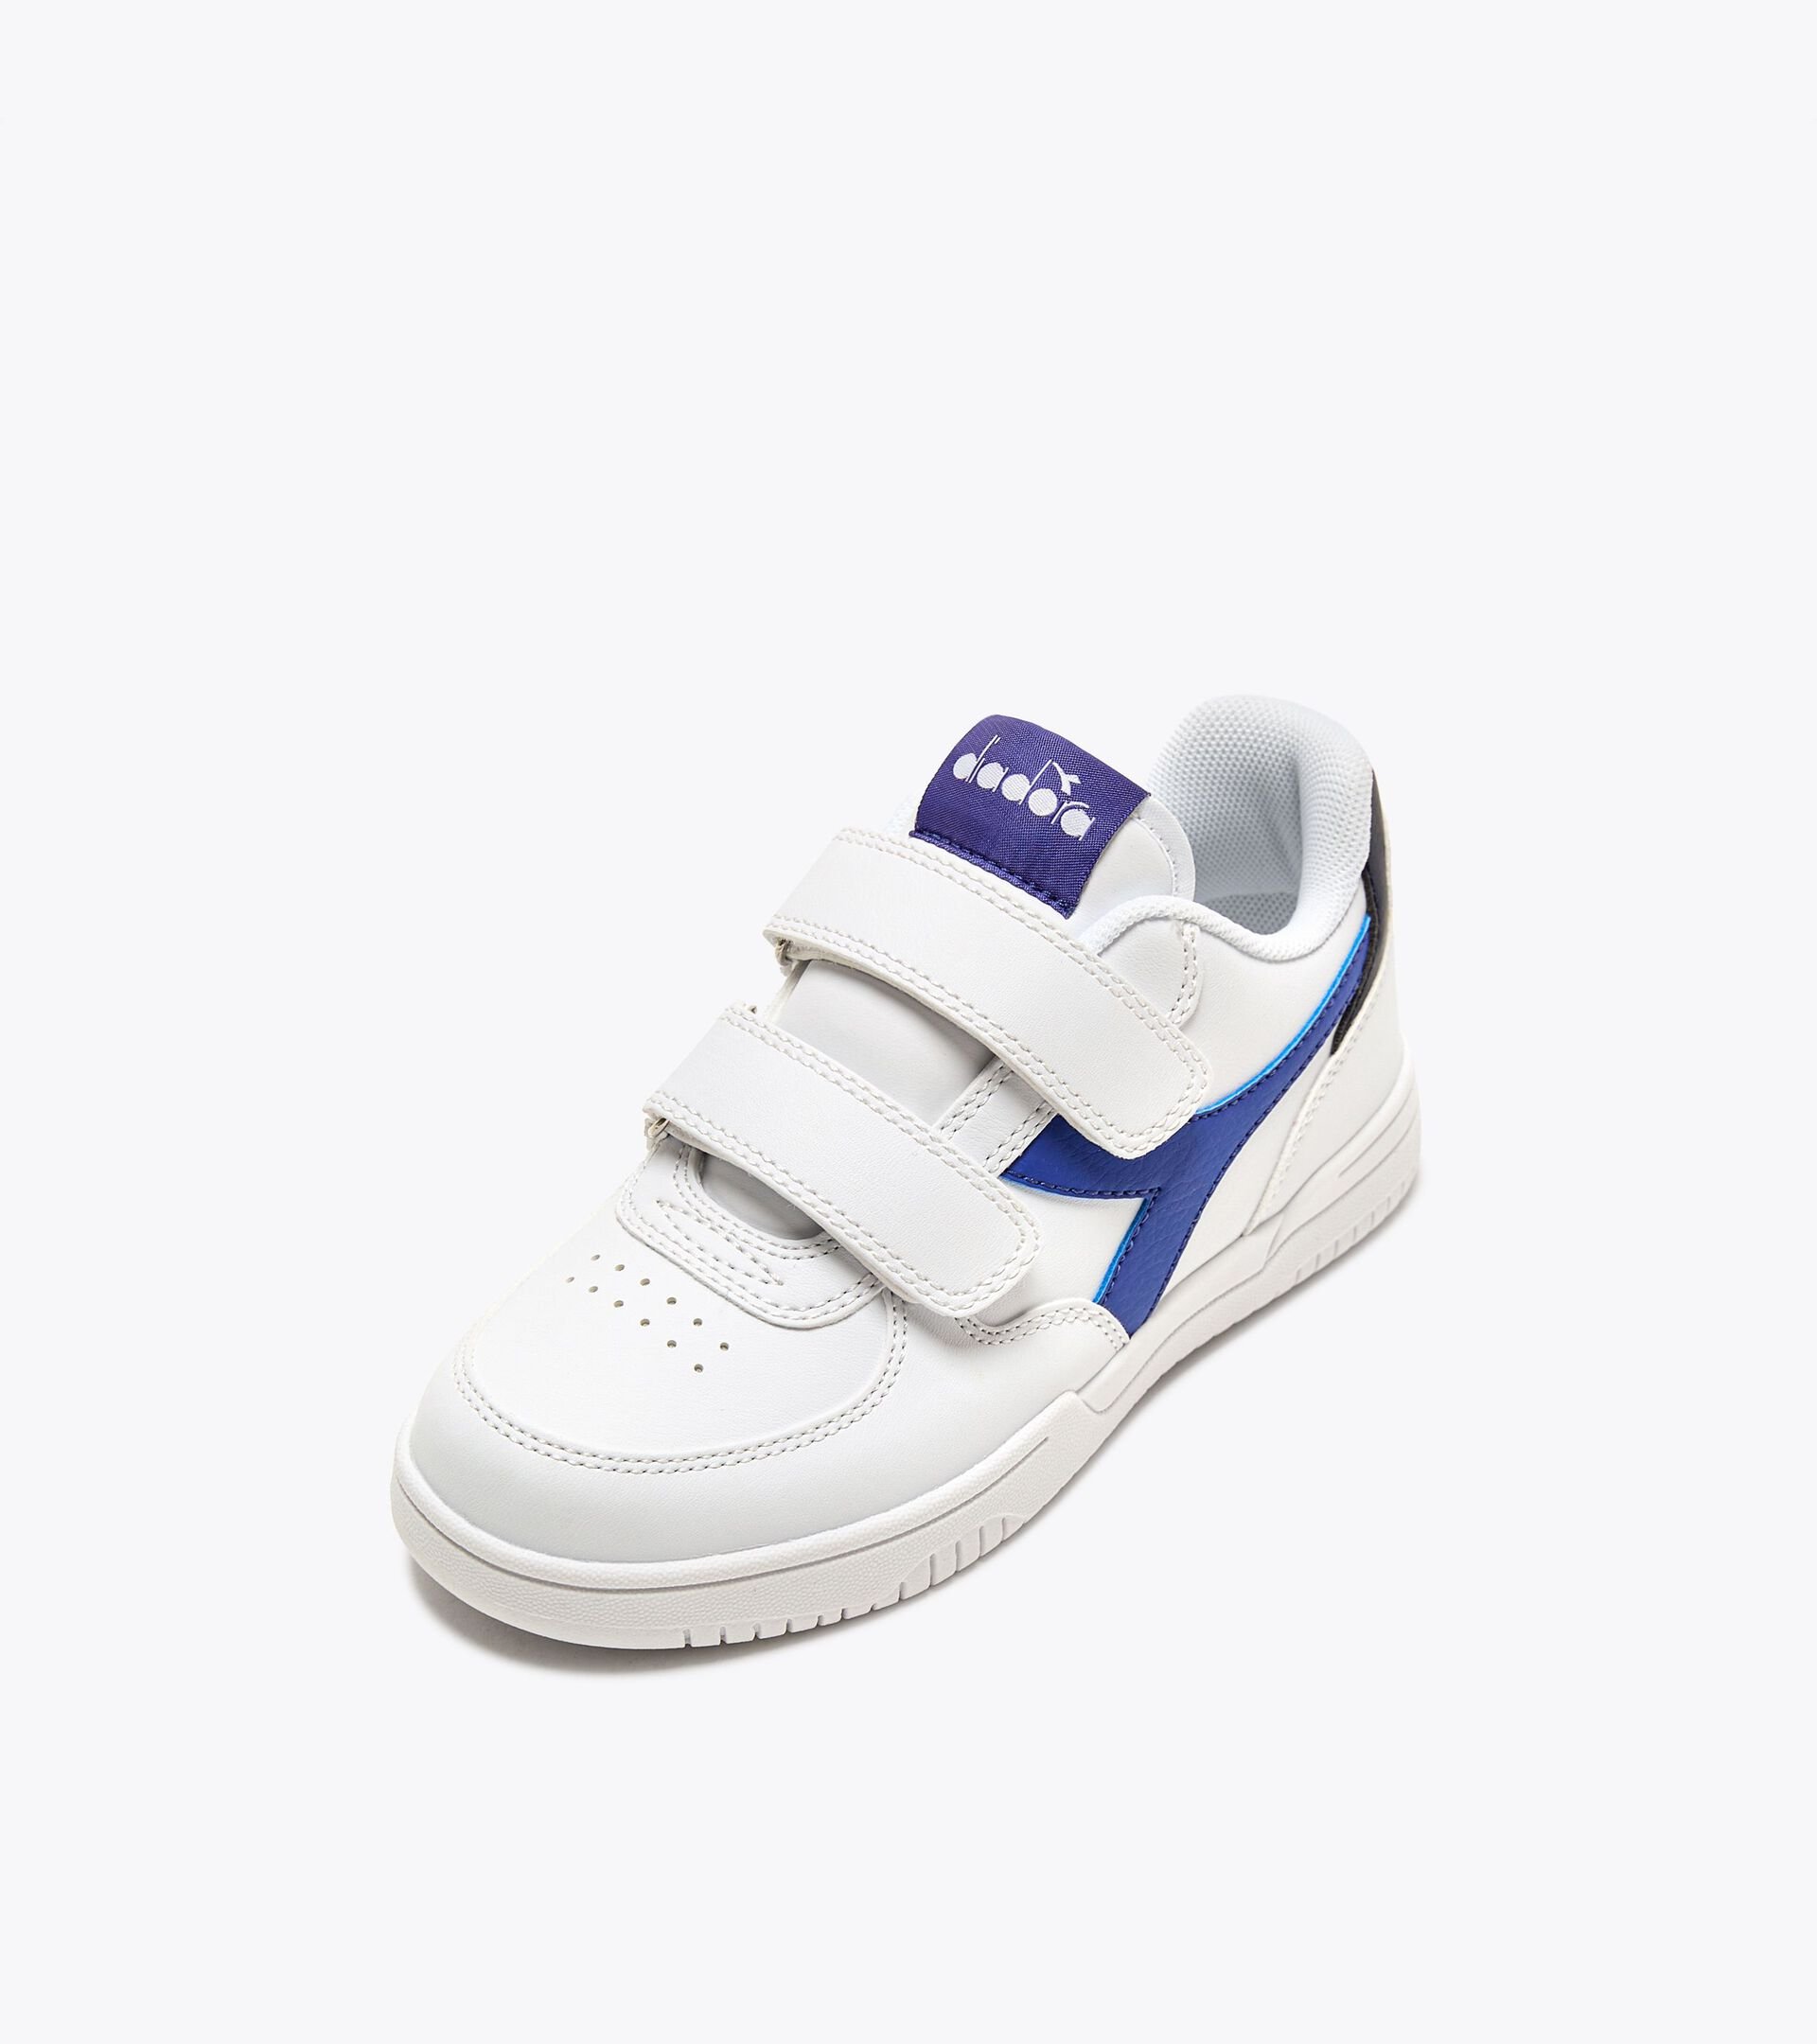 Sports shoes - Kids 4-8 years RAPTOR LOW PS WHT/SURF THE WEB/PEACOAT - Diadora